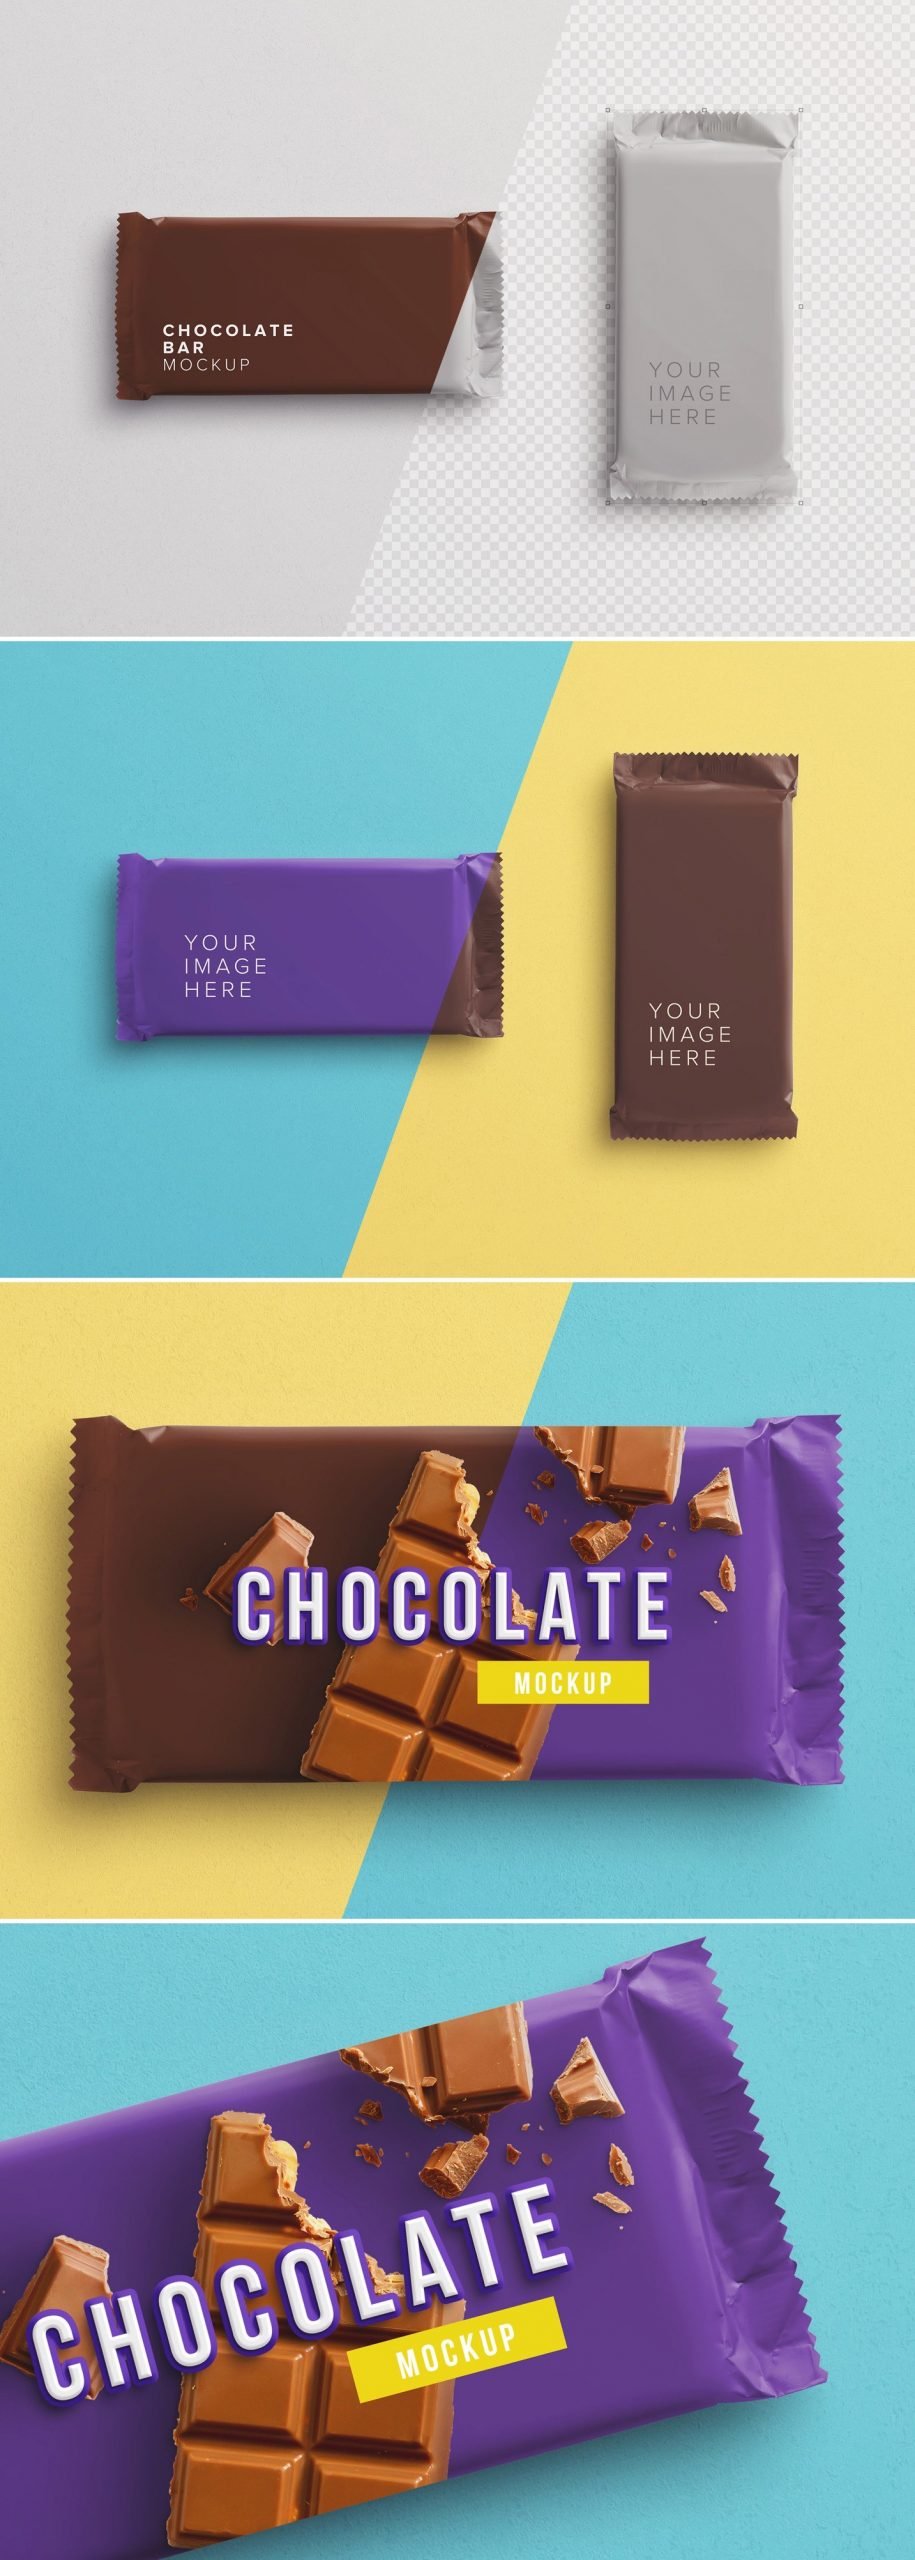 chocolate bar mockup preview1 1 scaled